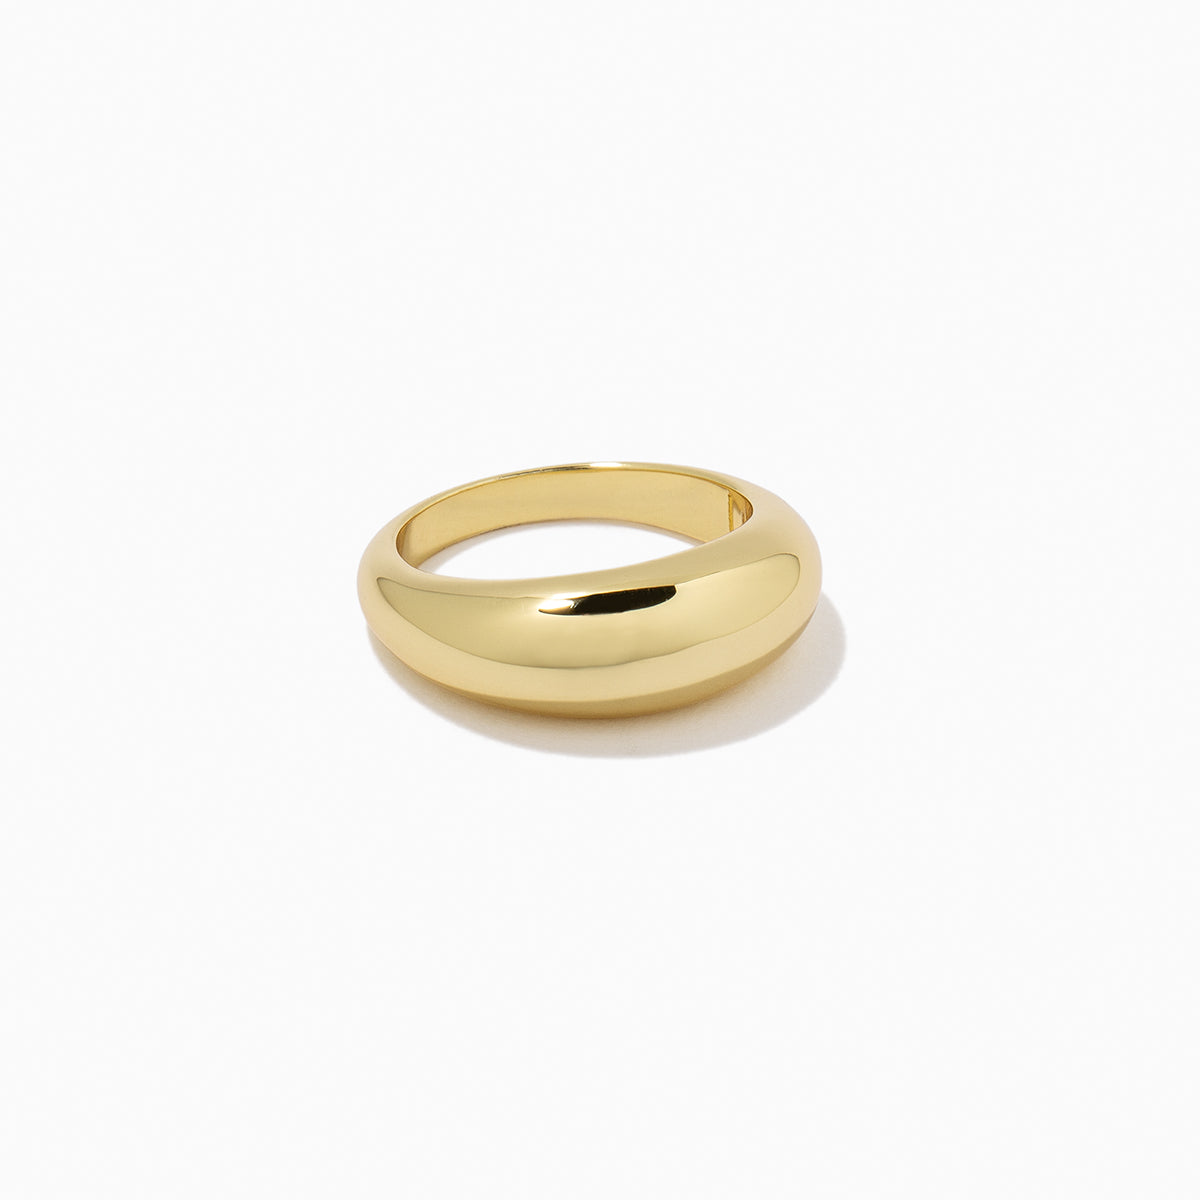 Lost Ring | Gold | Product Image | Uncommon James